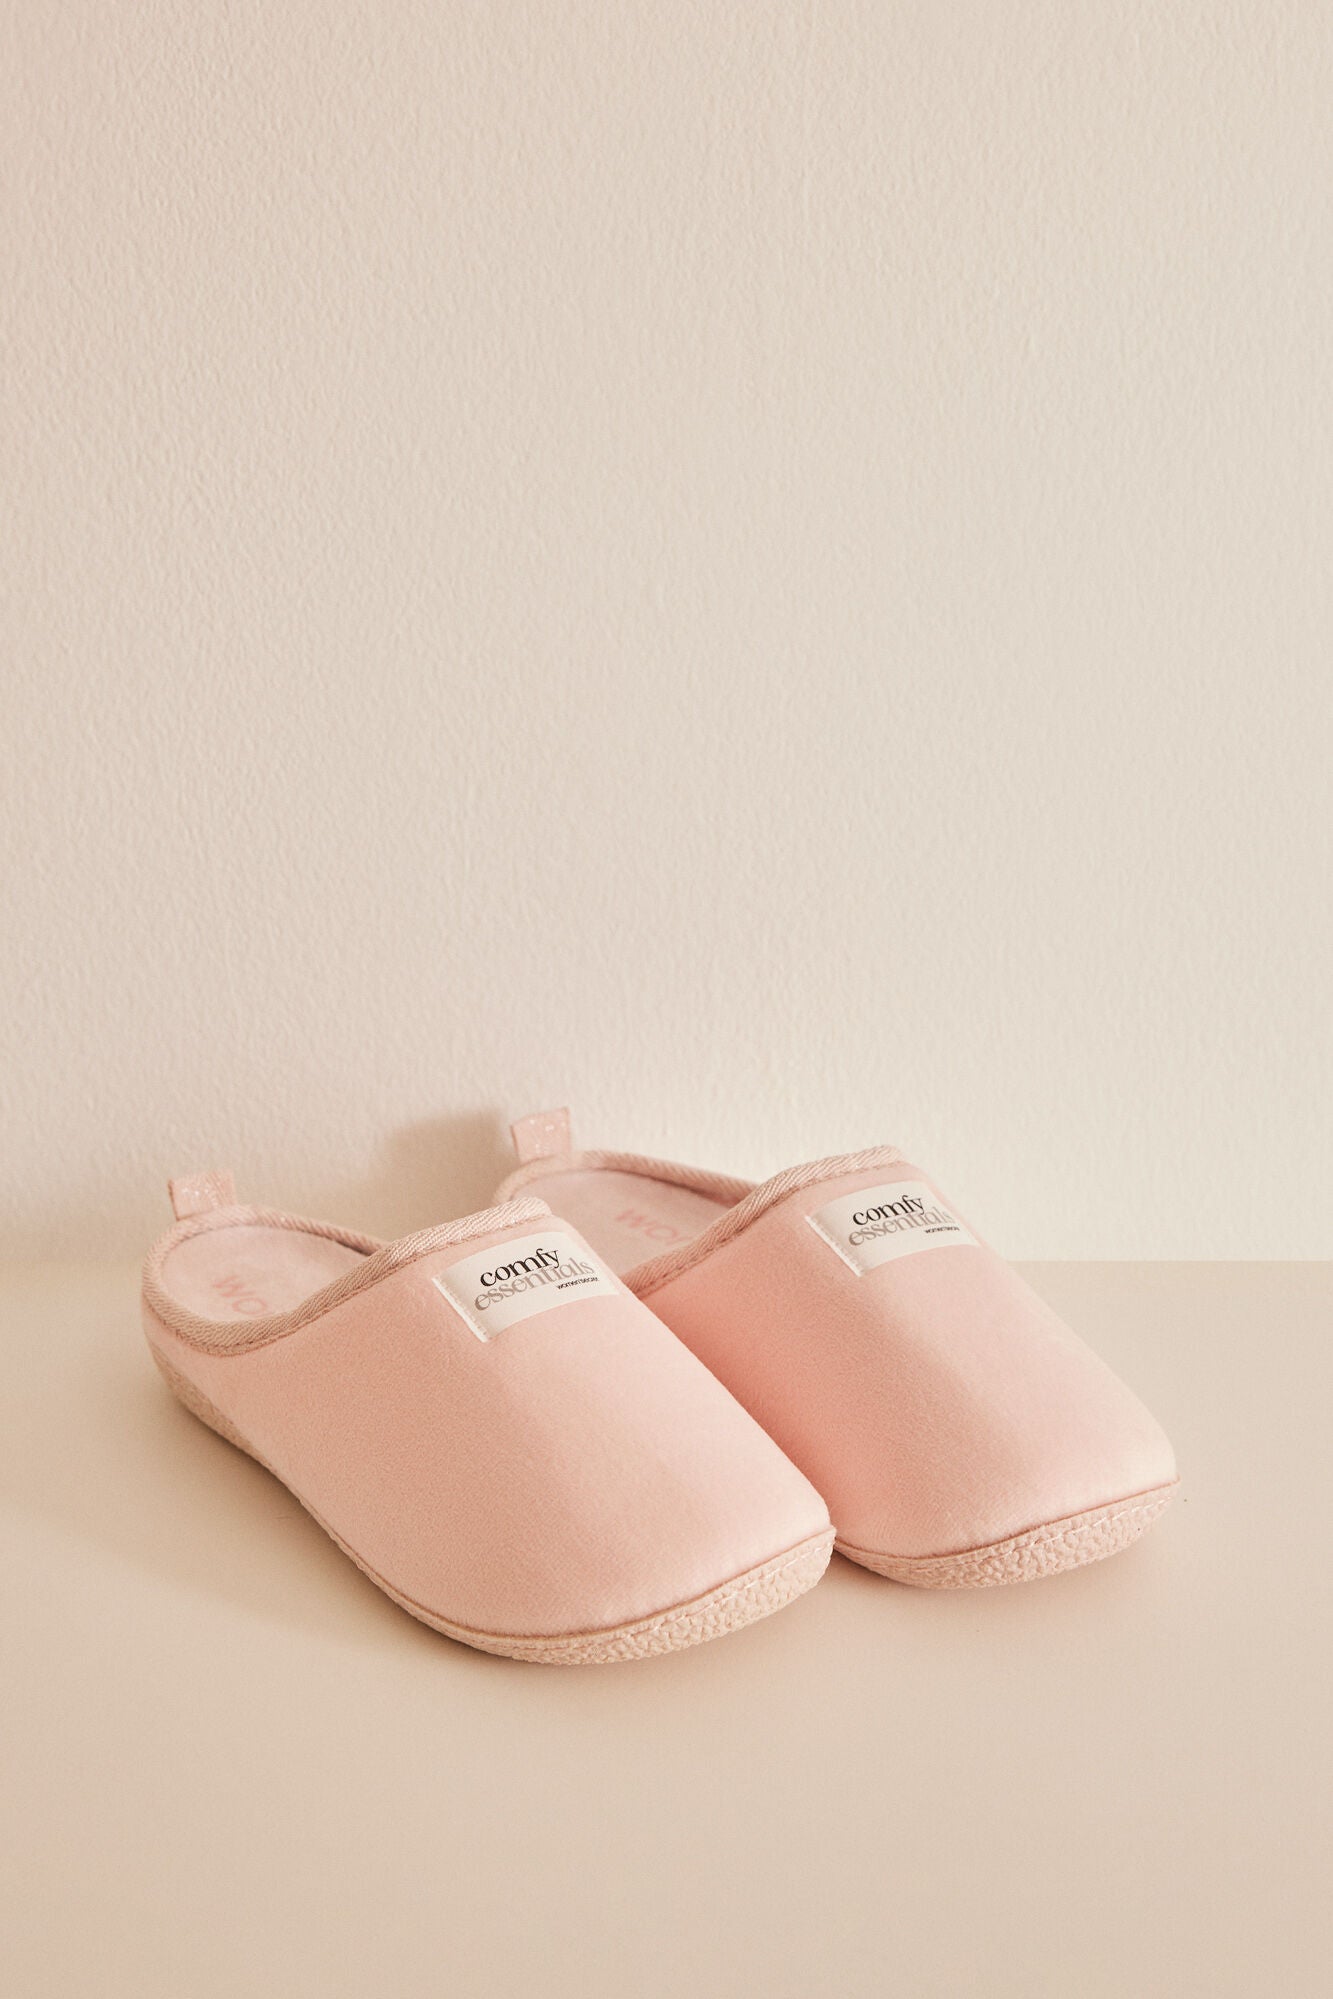 Slippers house removable pink insole